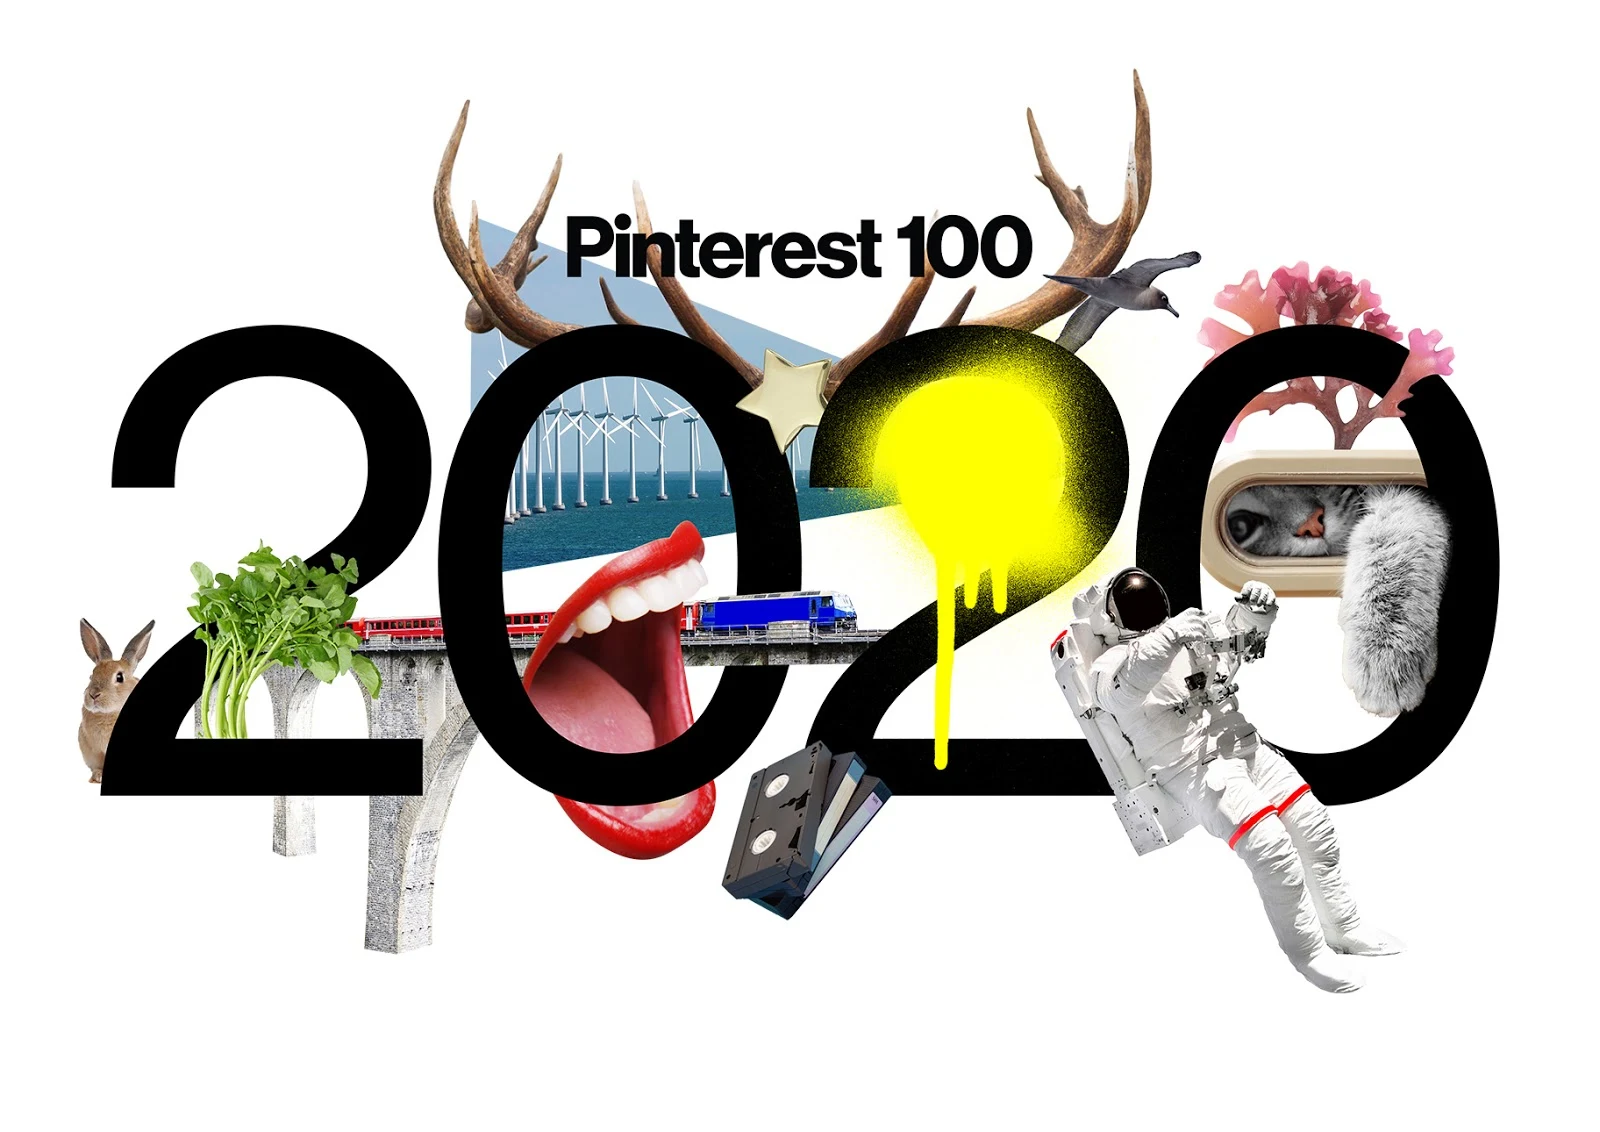 Pinterest Introduces Trend Tools To Bring Into Attention The Top Searches On The Platform